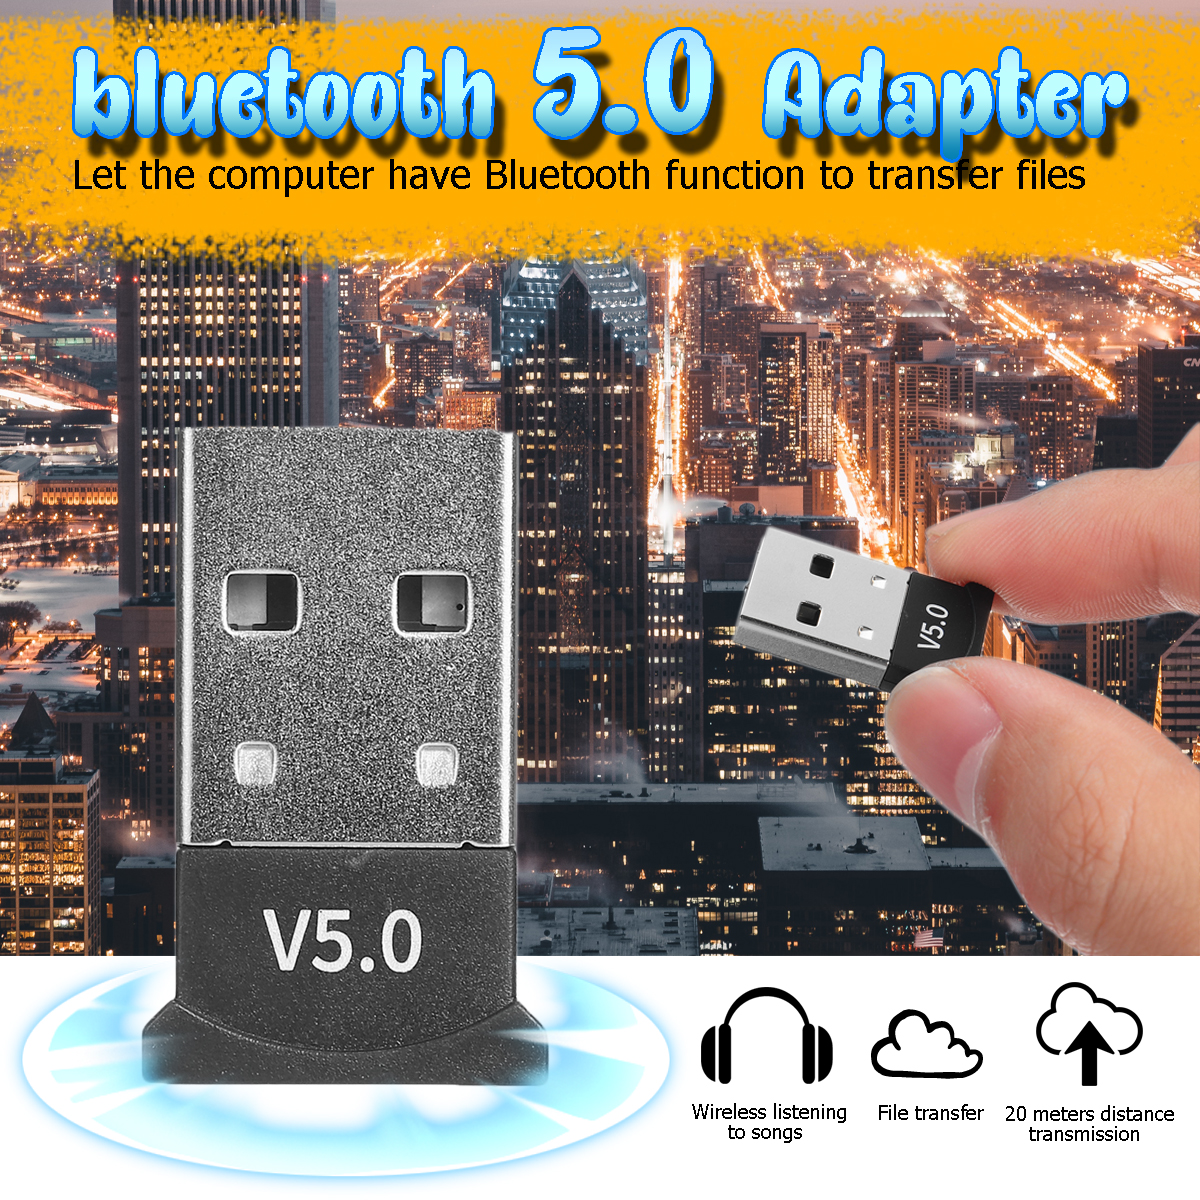 bluetooth-50-USB-Adapter-for-Window-7810-for-Vista-XP-for-Mac-OS-X-PC-Keyboard-Mouse-Gamepads-Speake-1534187-2